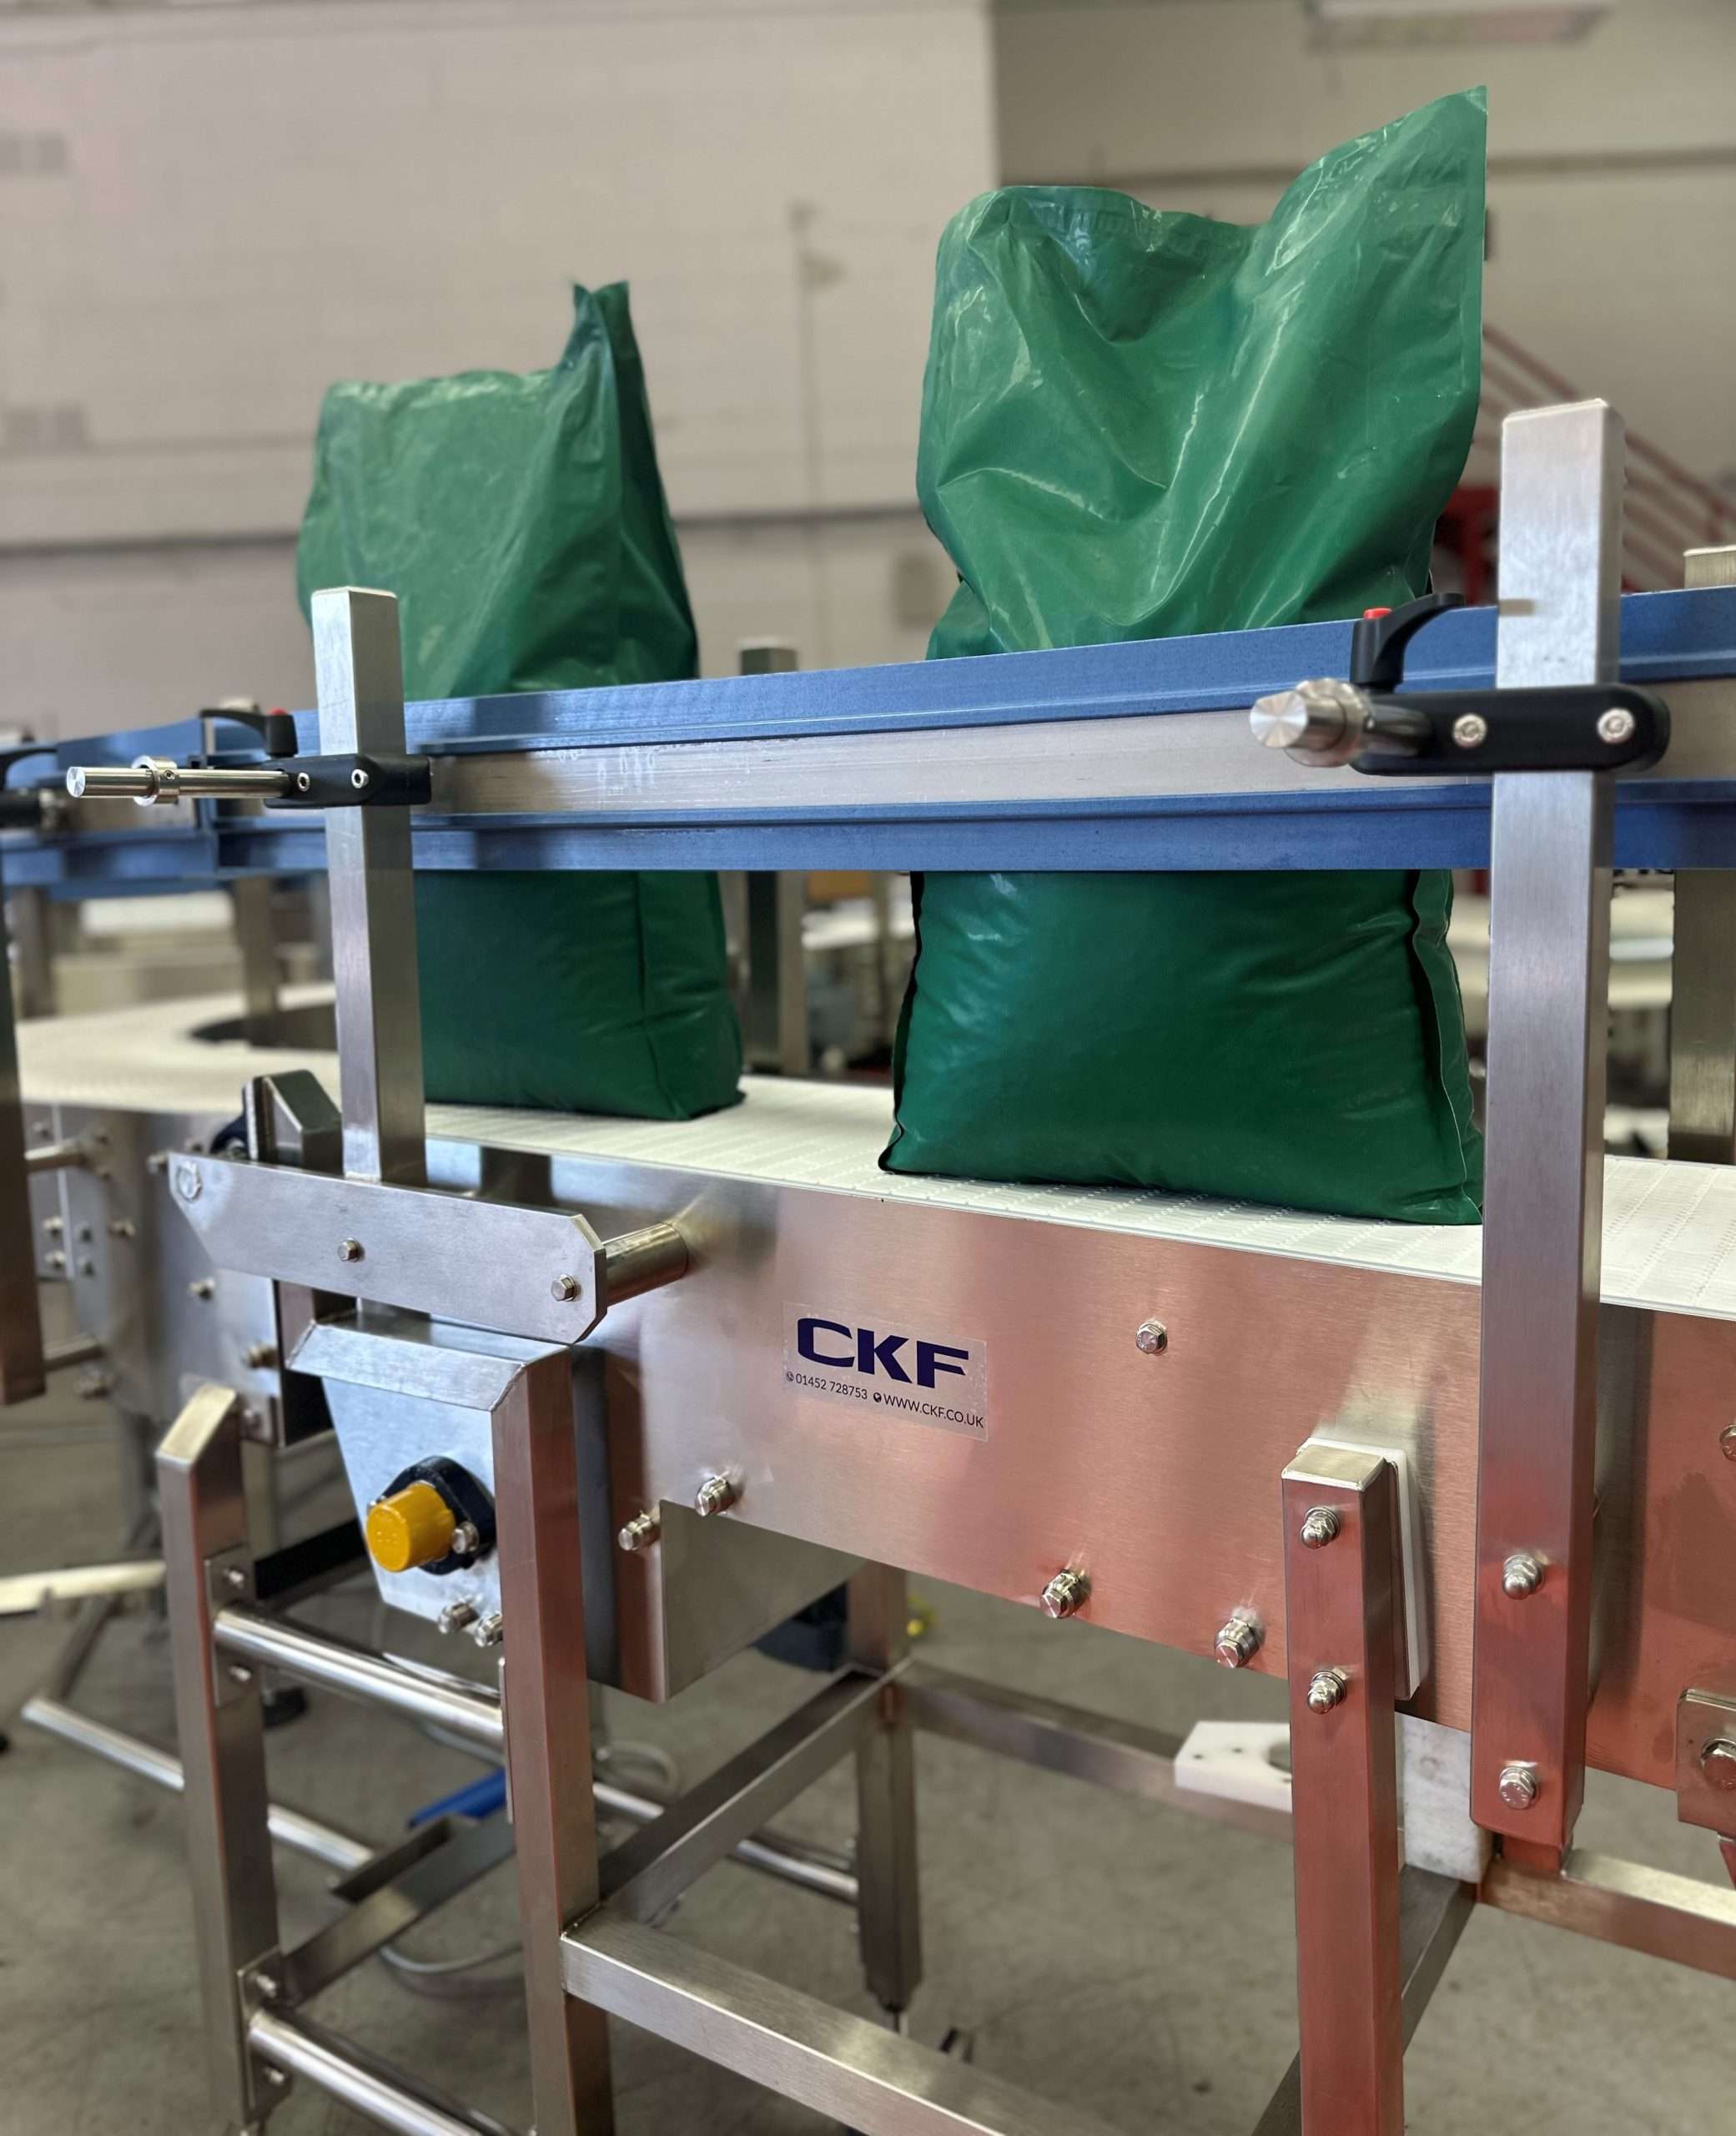 CKF delivers their latest Kibble and bag transfer system to a world-leading pet food manufacturer